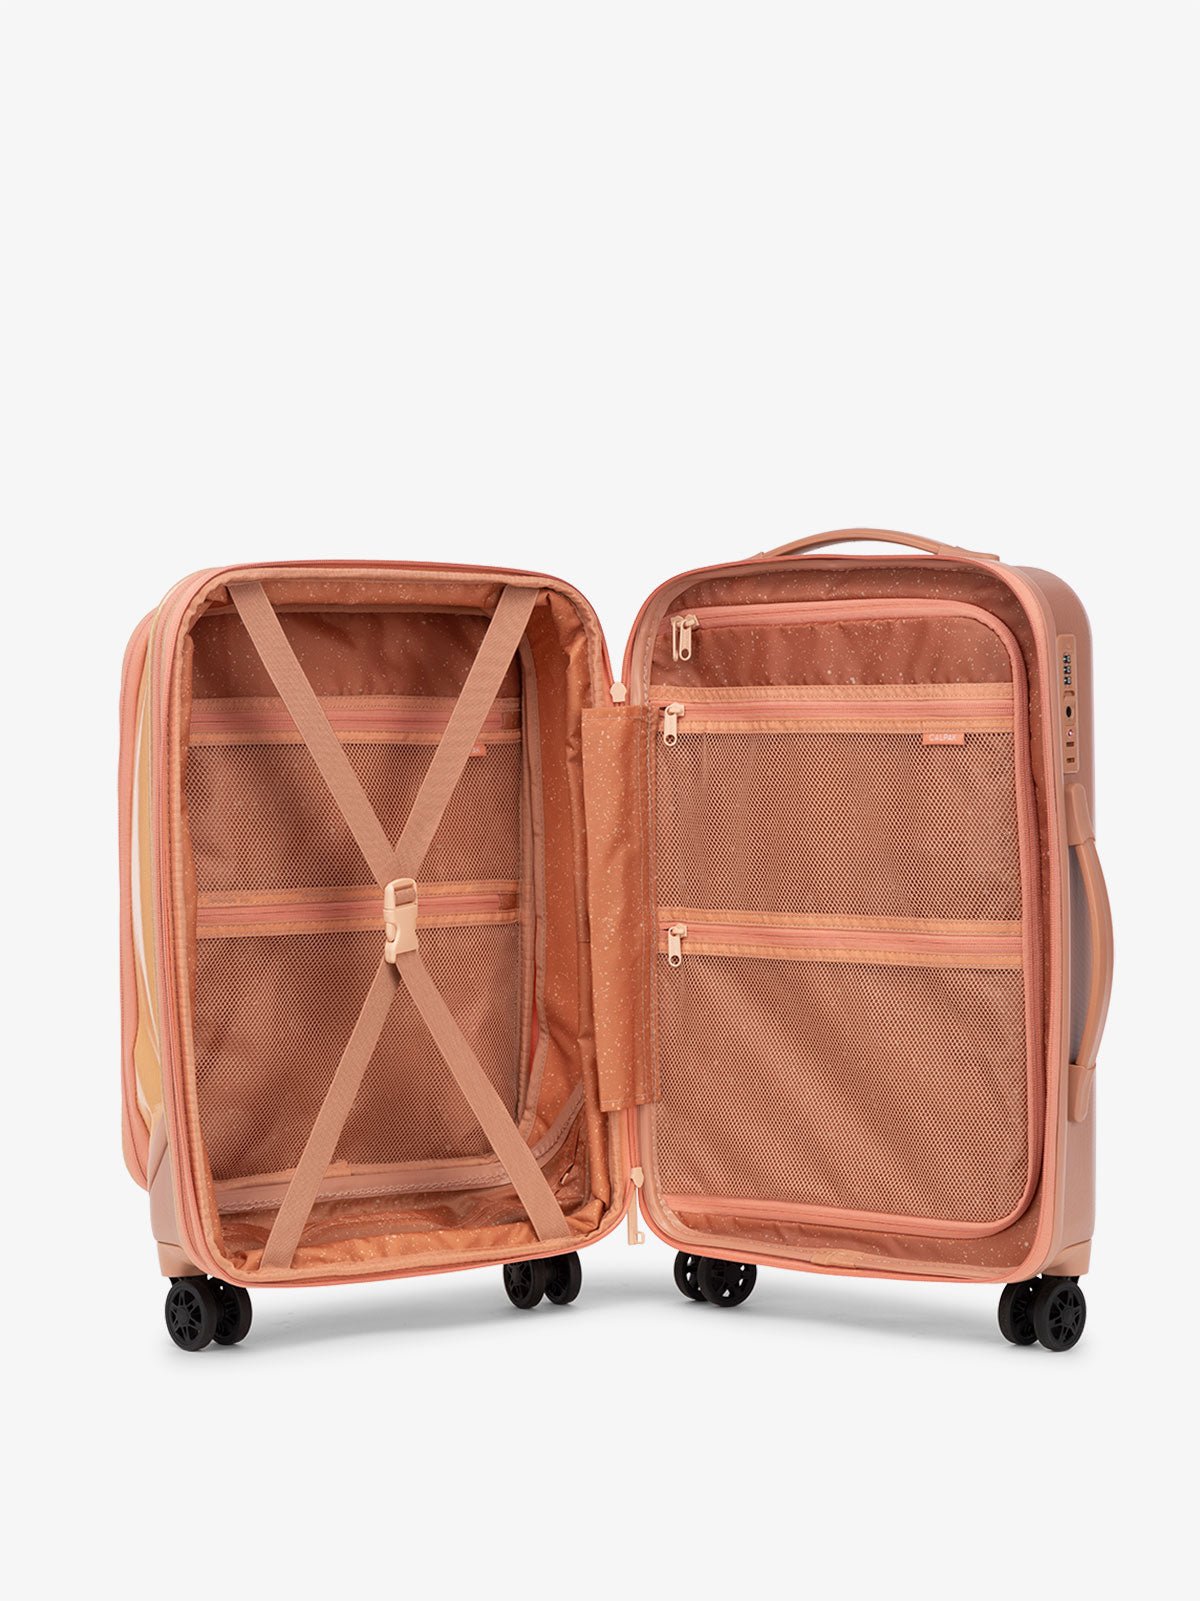 CALPAK Terra Carry-On suitcase interior with multiple pockets and compression strap in canyon